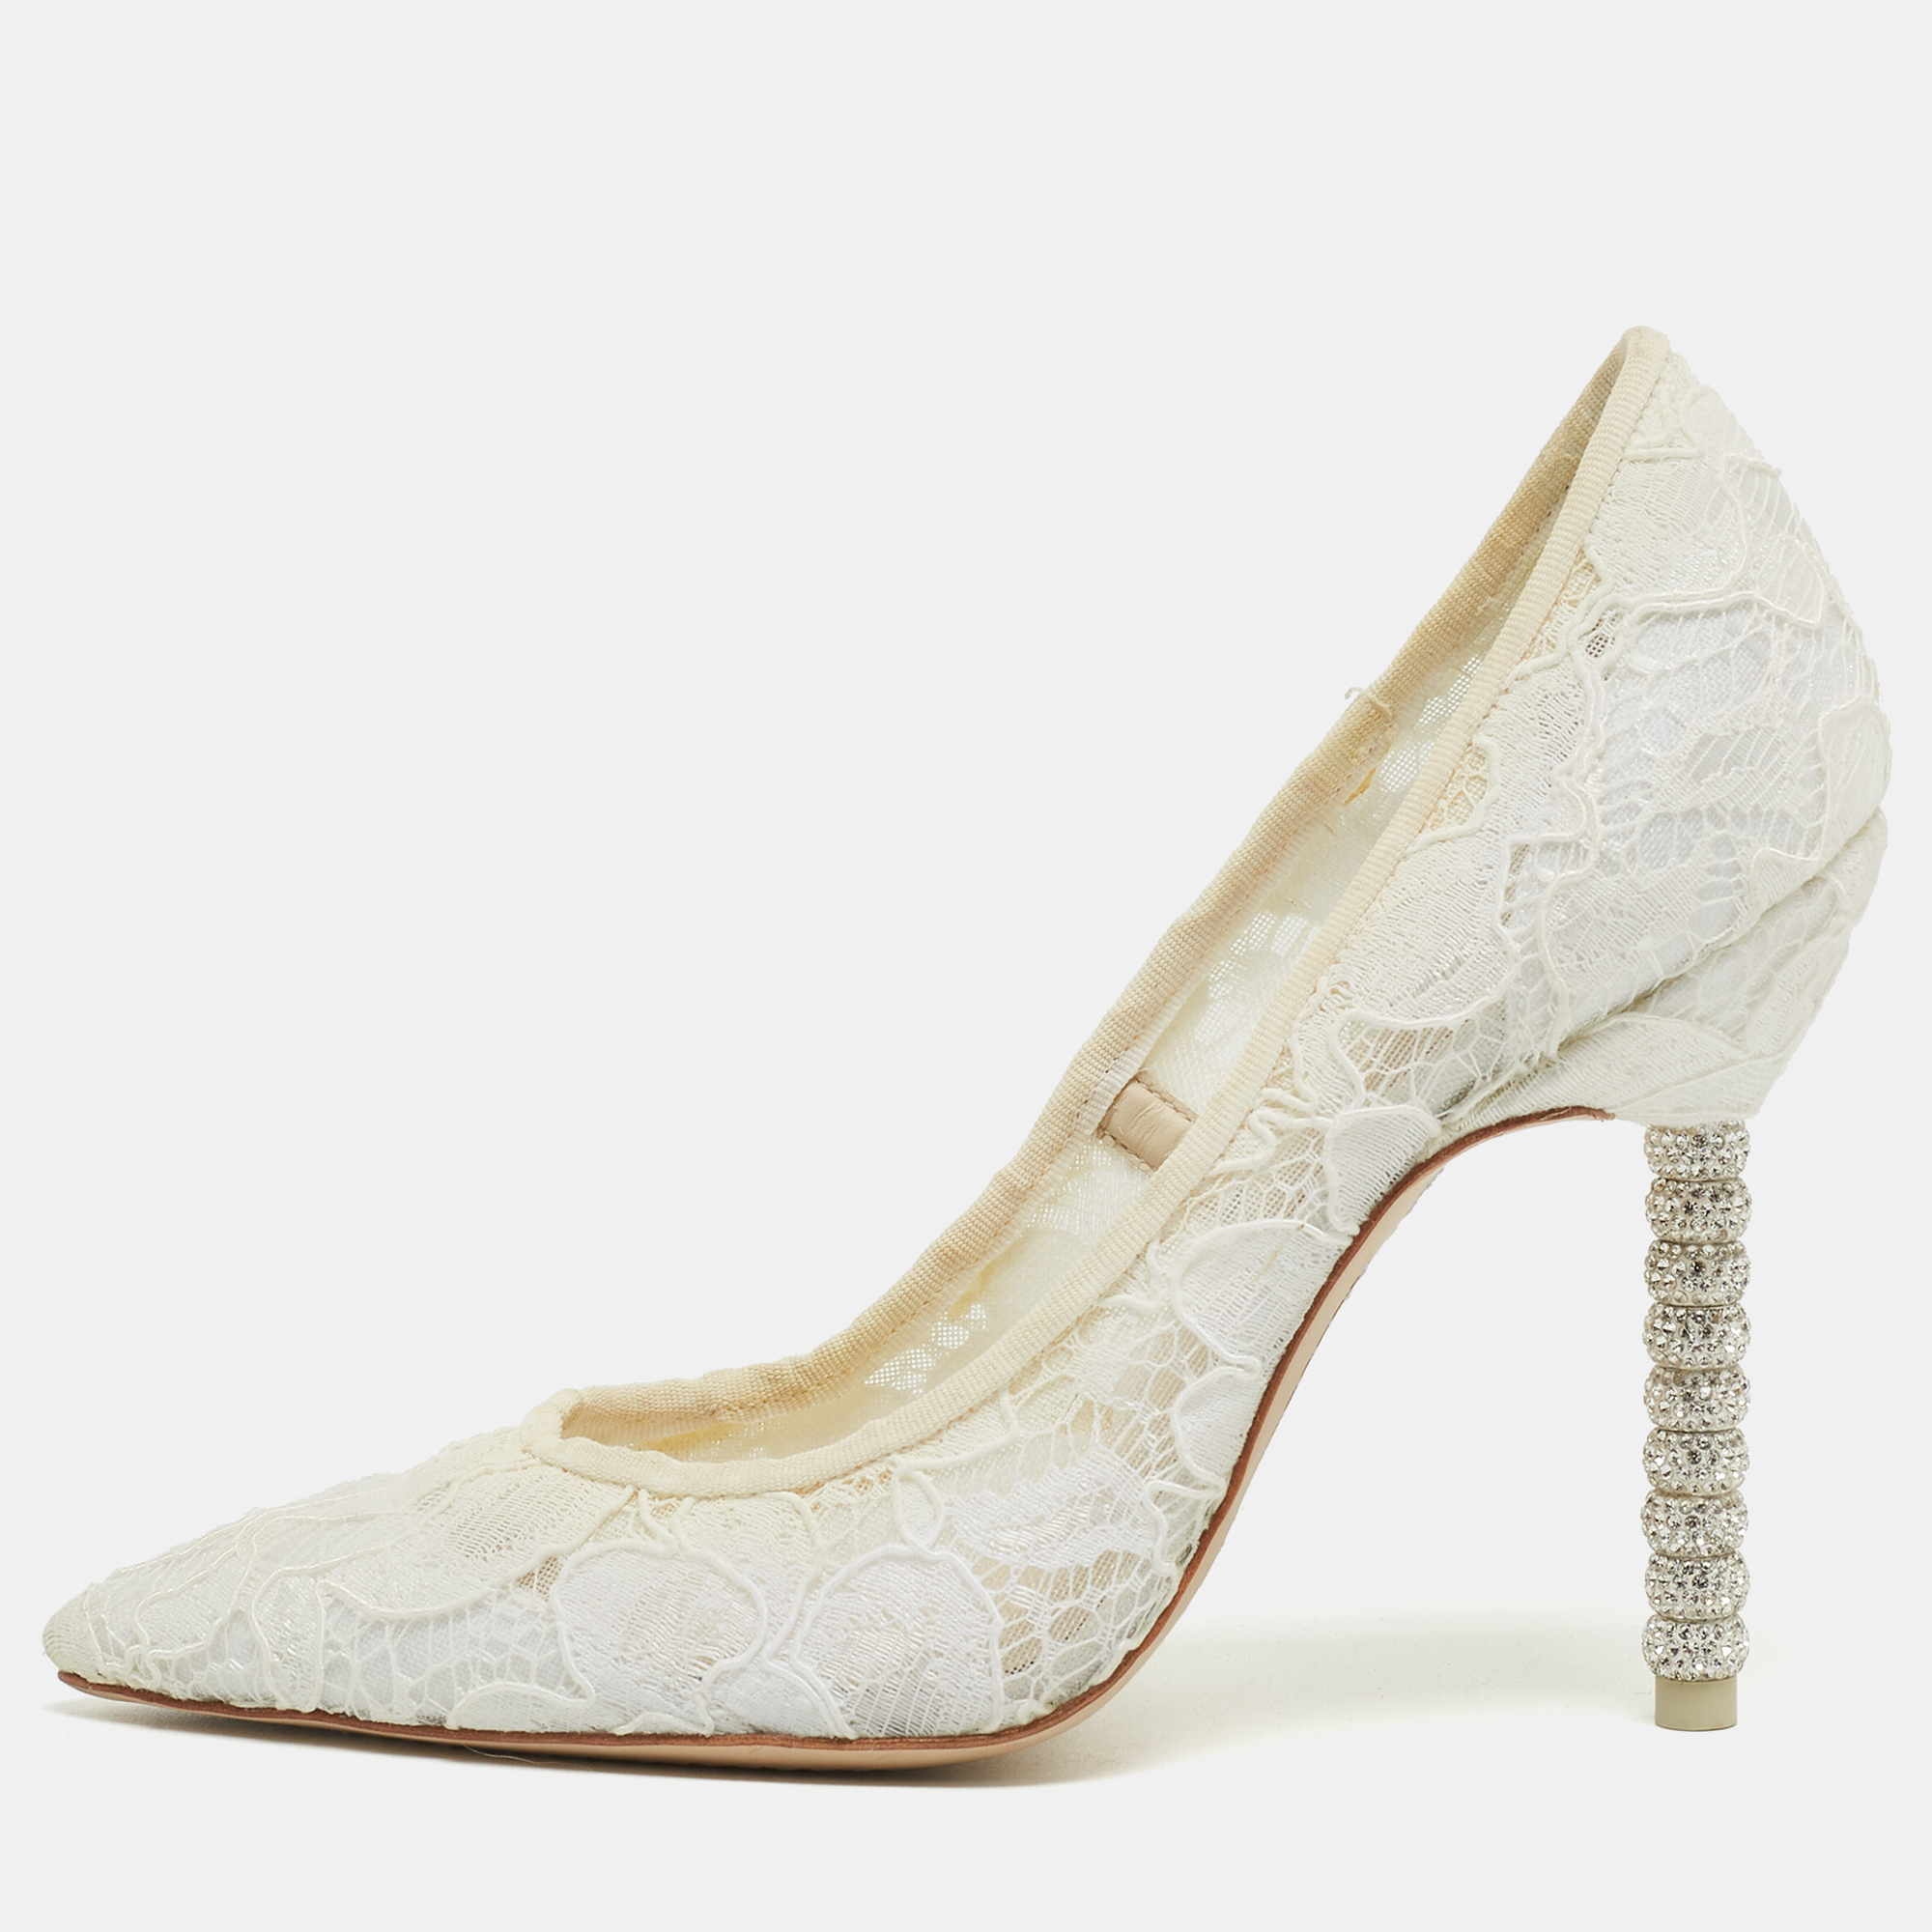 

Sophia Webster White Lace Coco Crystal Pumps Size